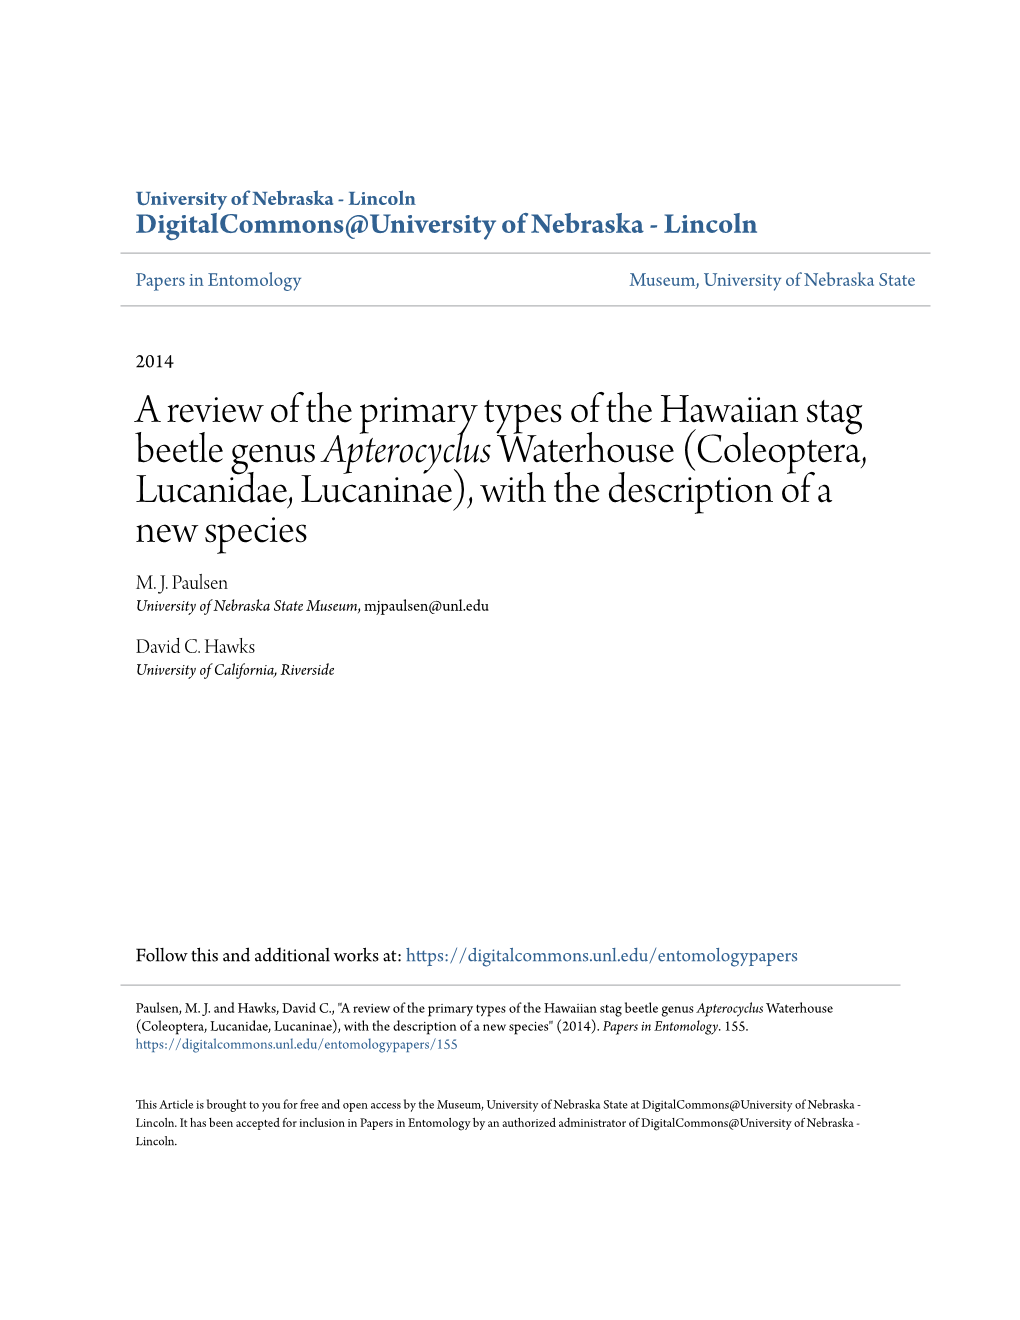 A Review of the Primary Types of the Hawaiian Stag Beetle Genus &lt;I